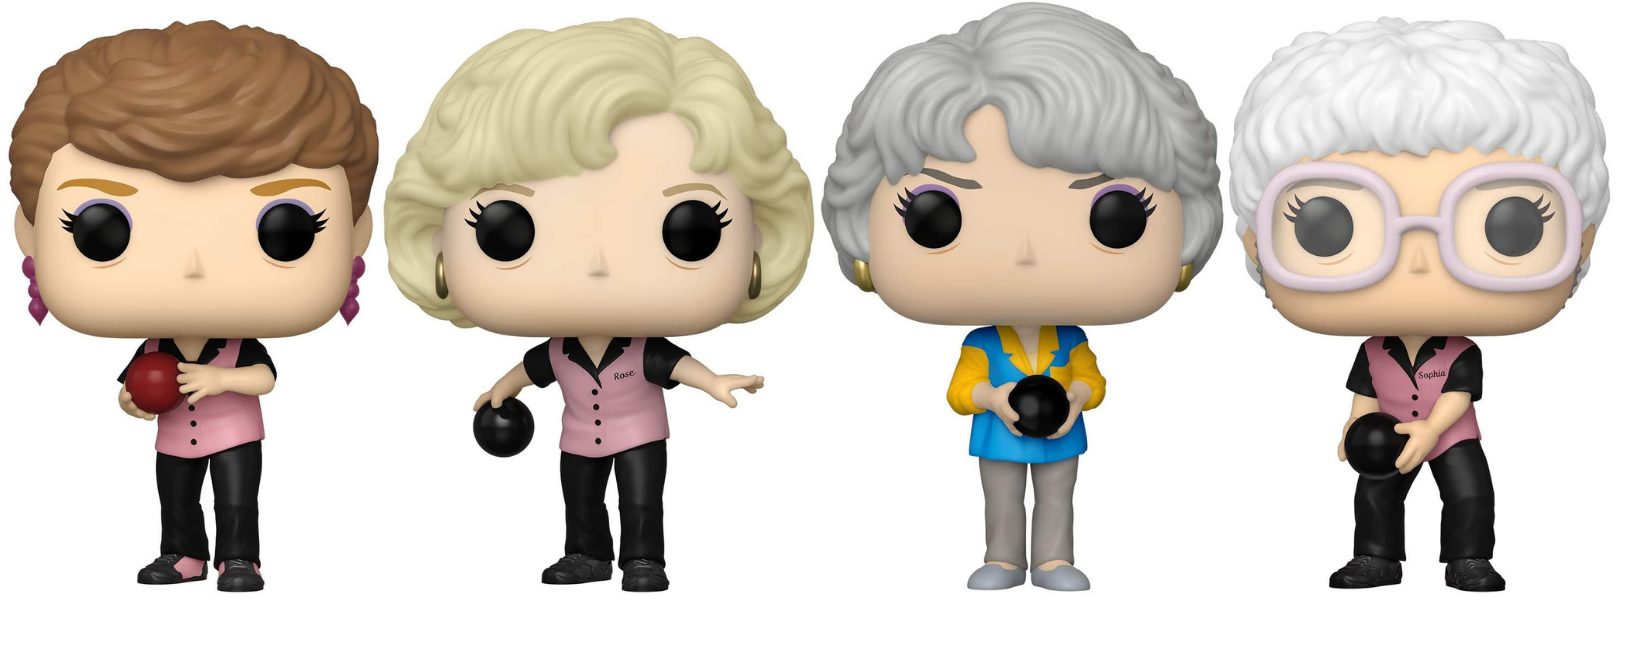 These bowling 'Golden Girls' Funko toys will soon be up for grabs